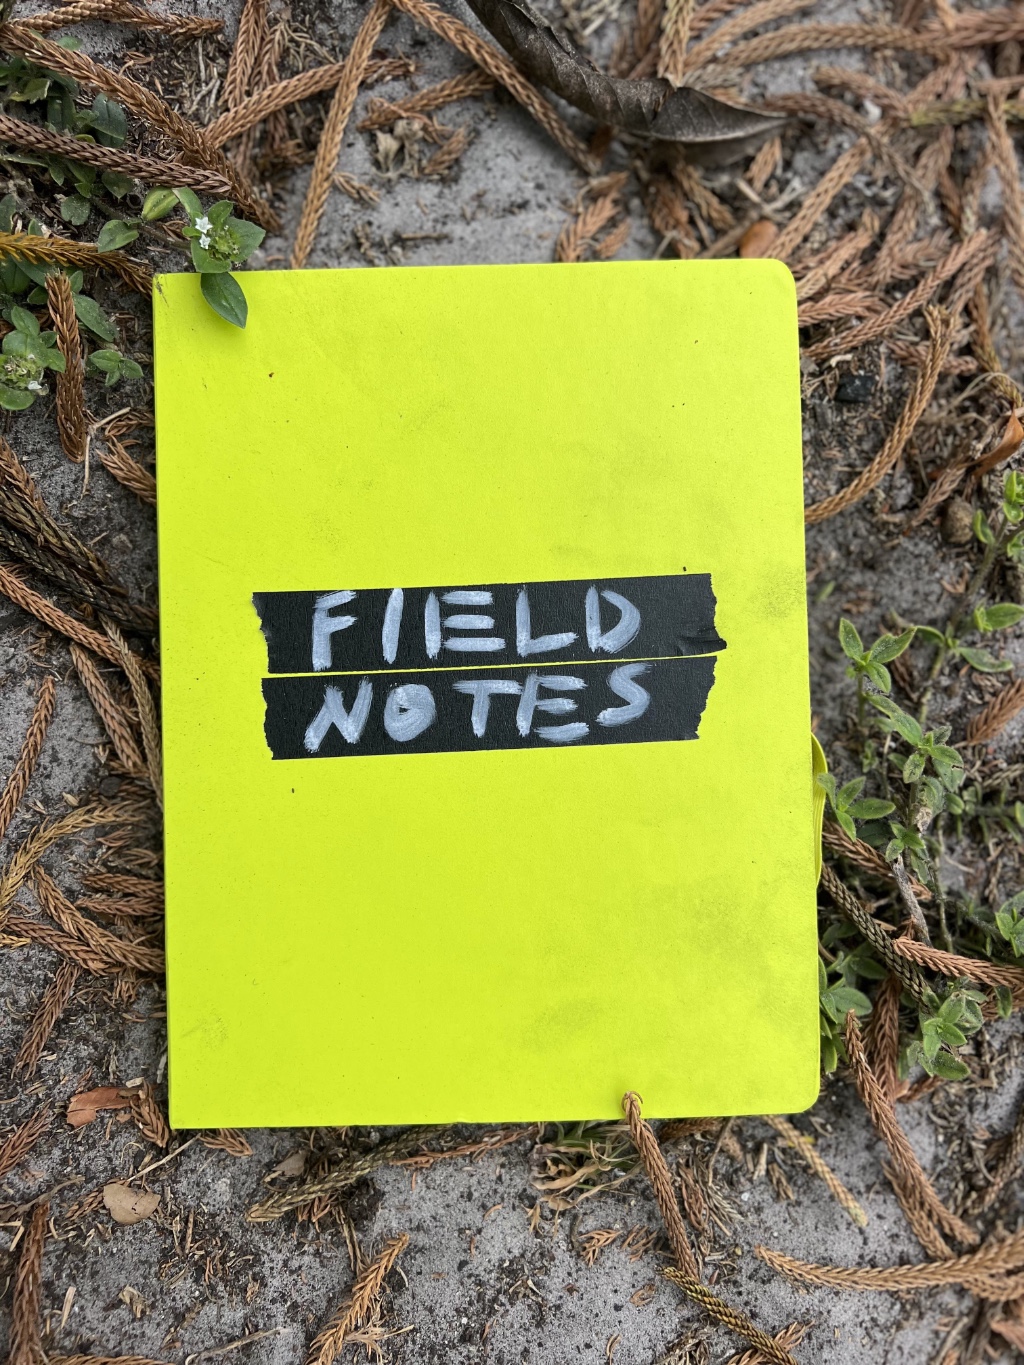 Neon green field notebook lying on dried plant material